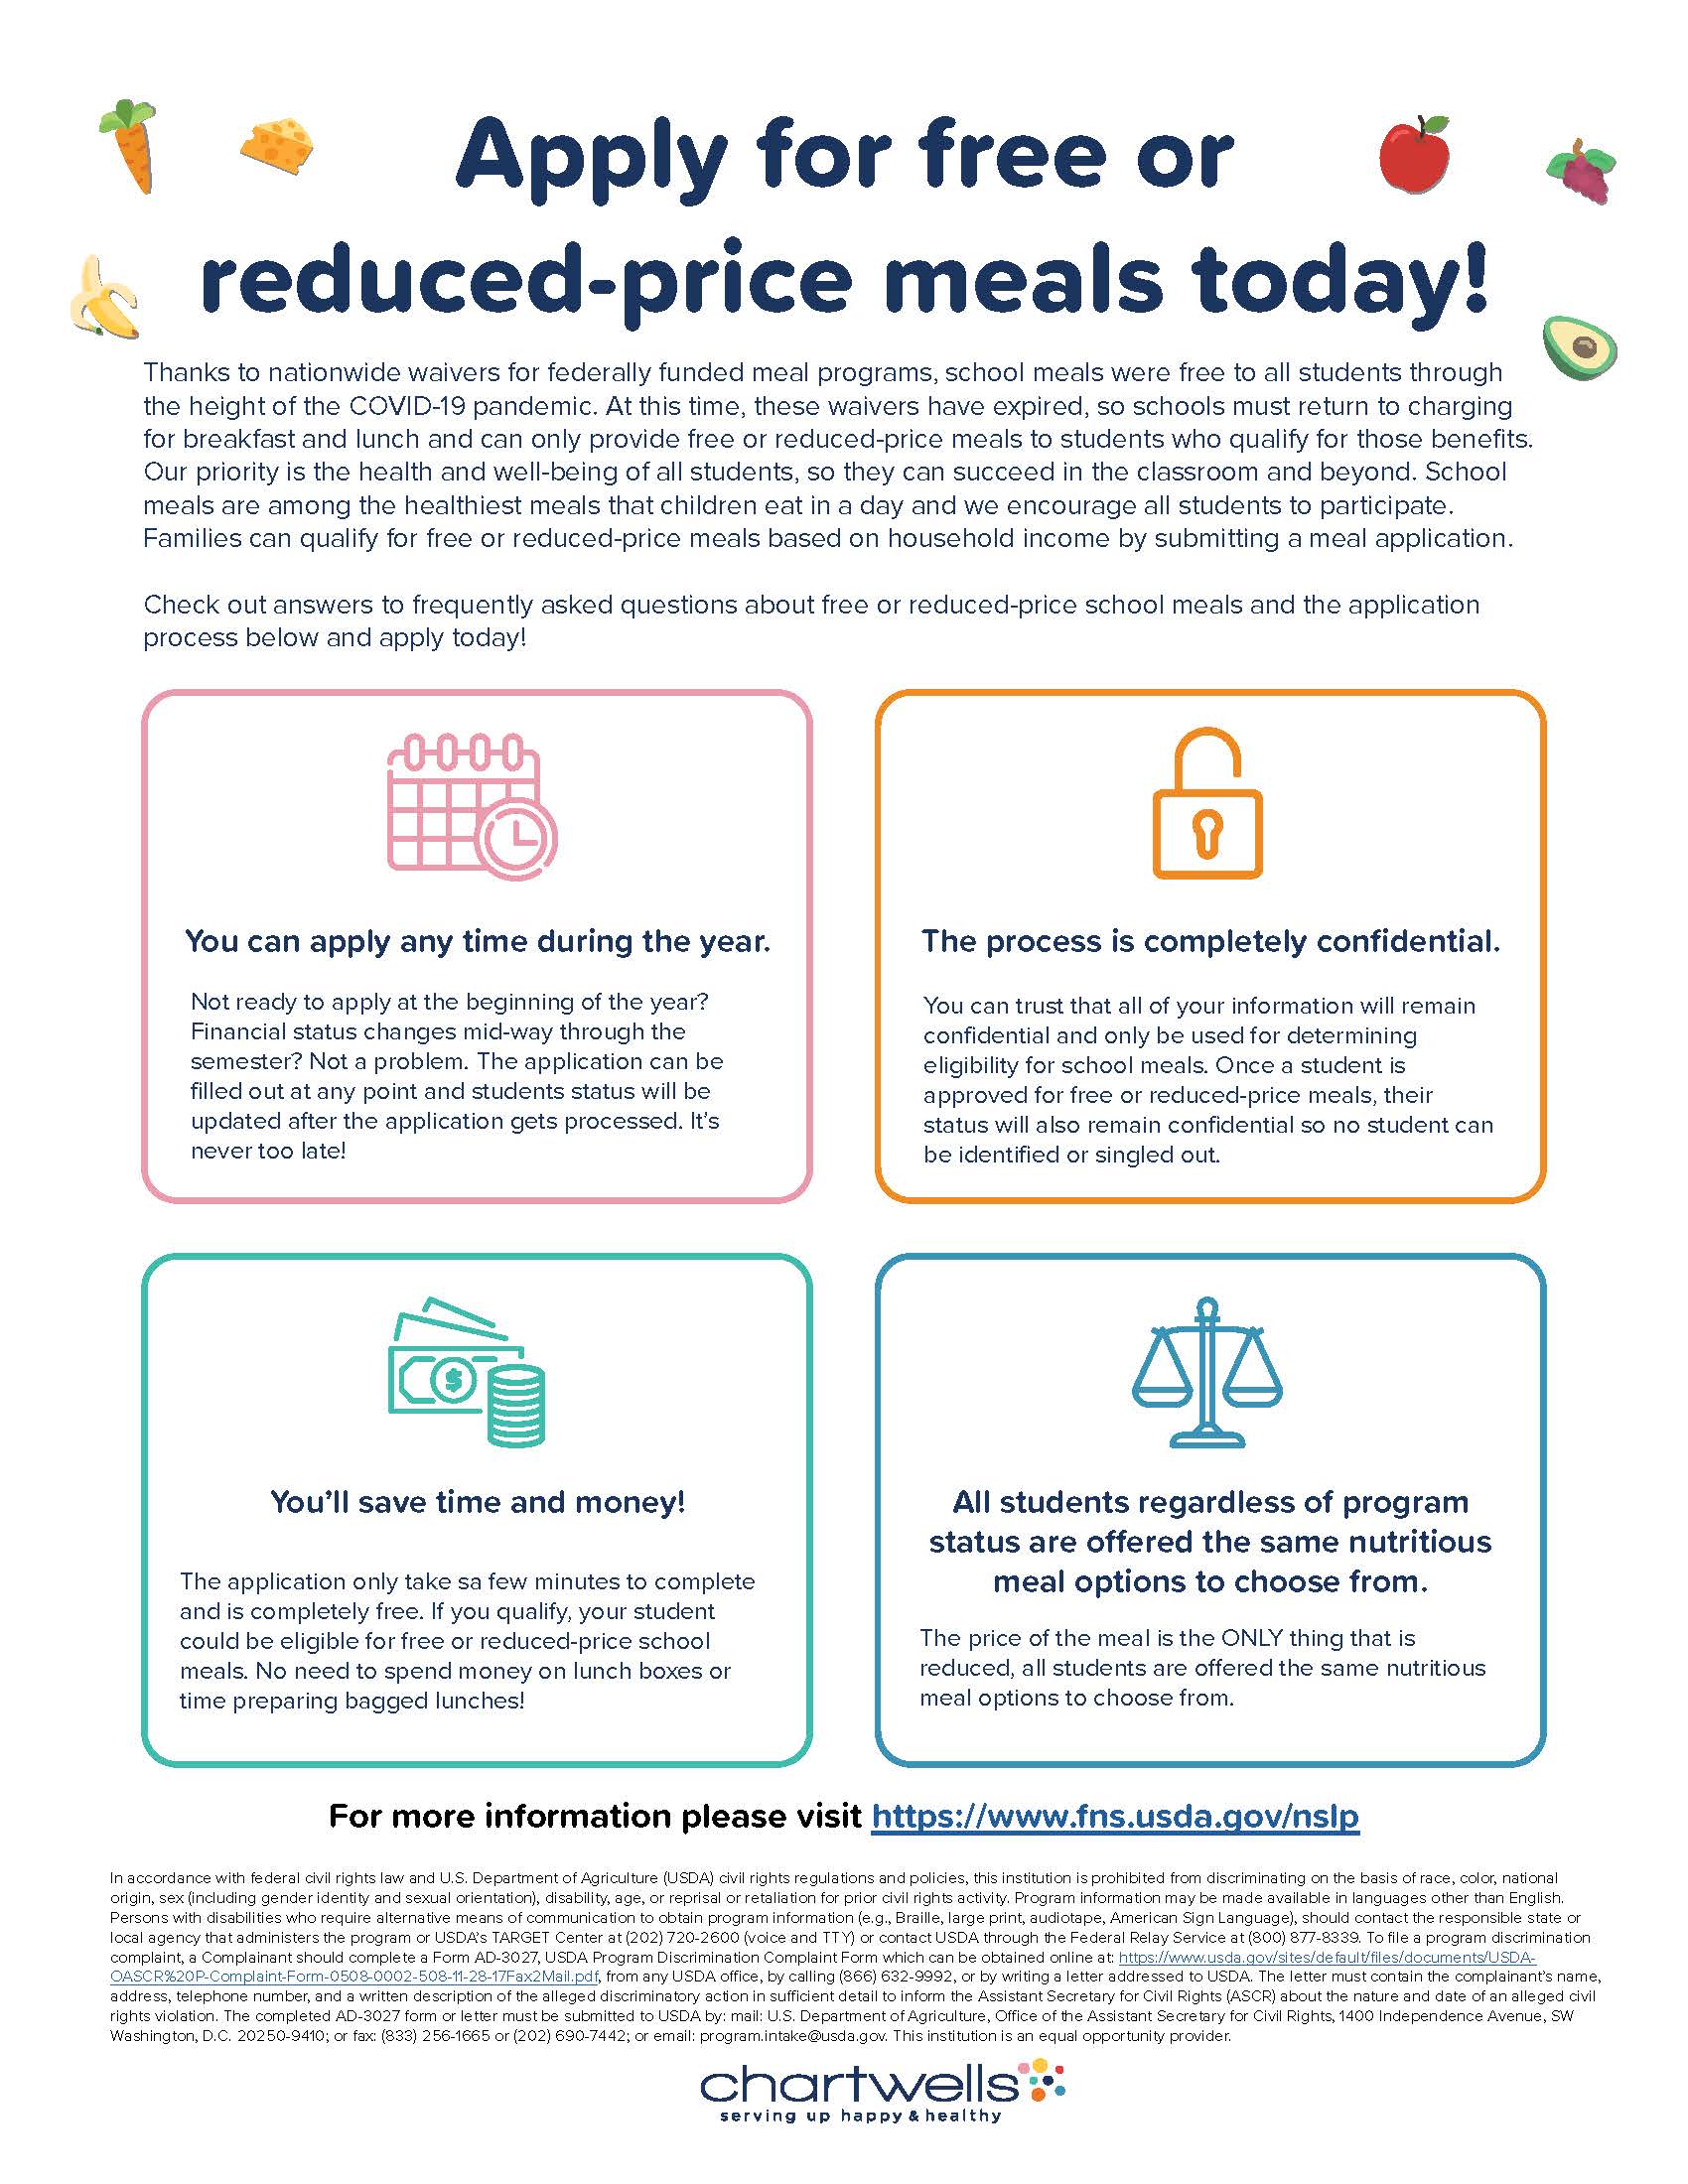 free reduced meal application info